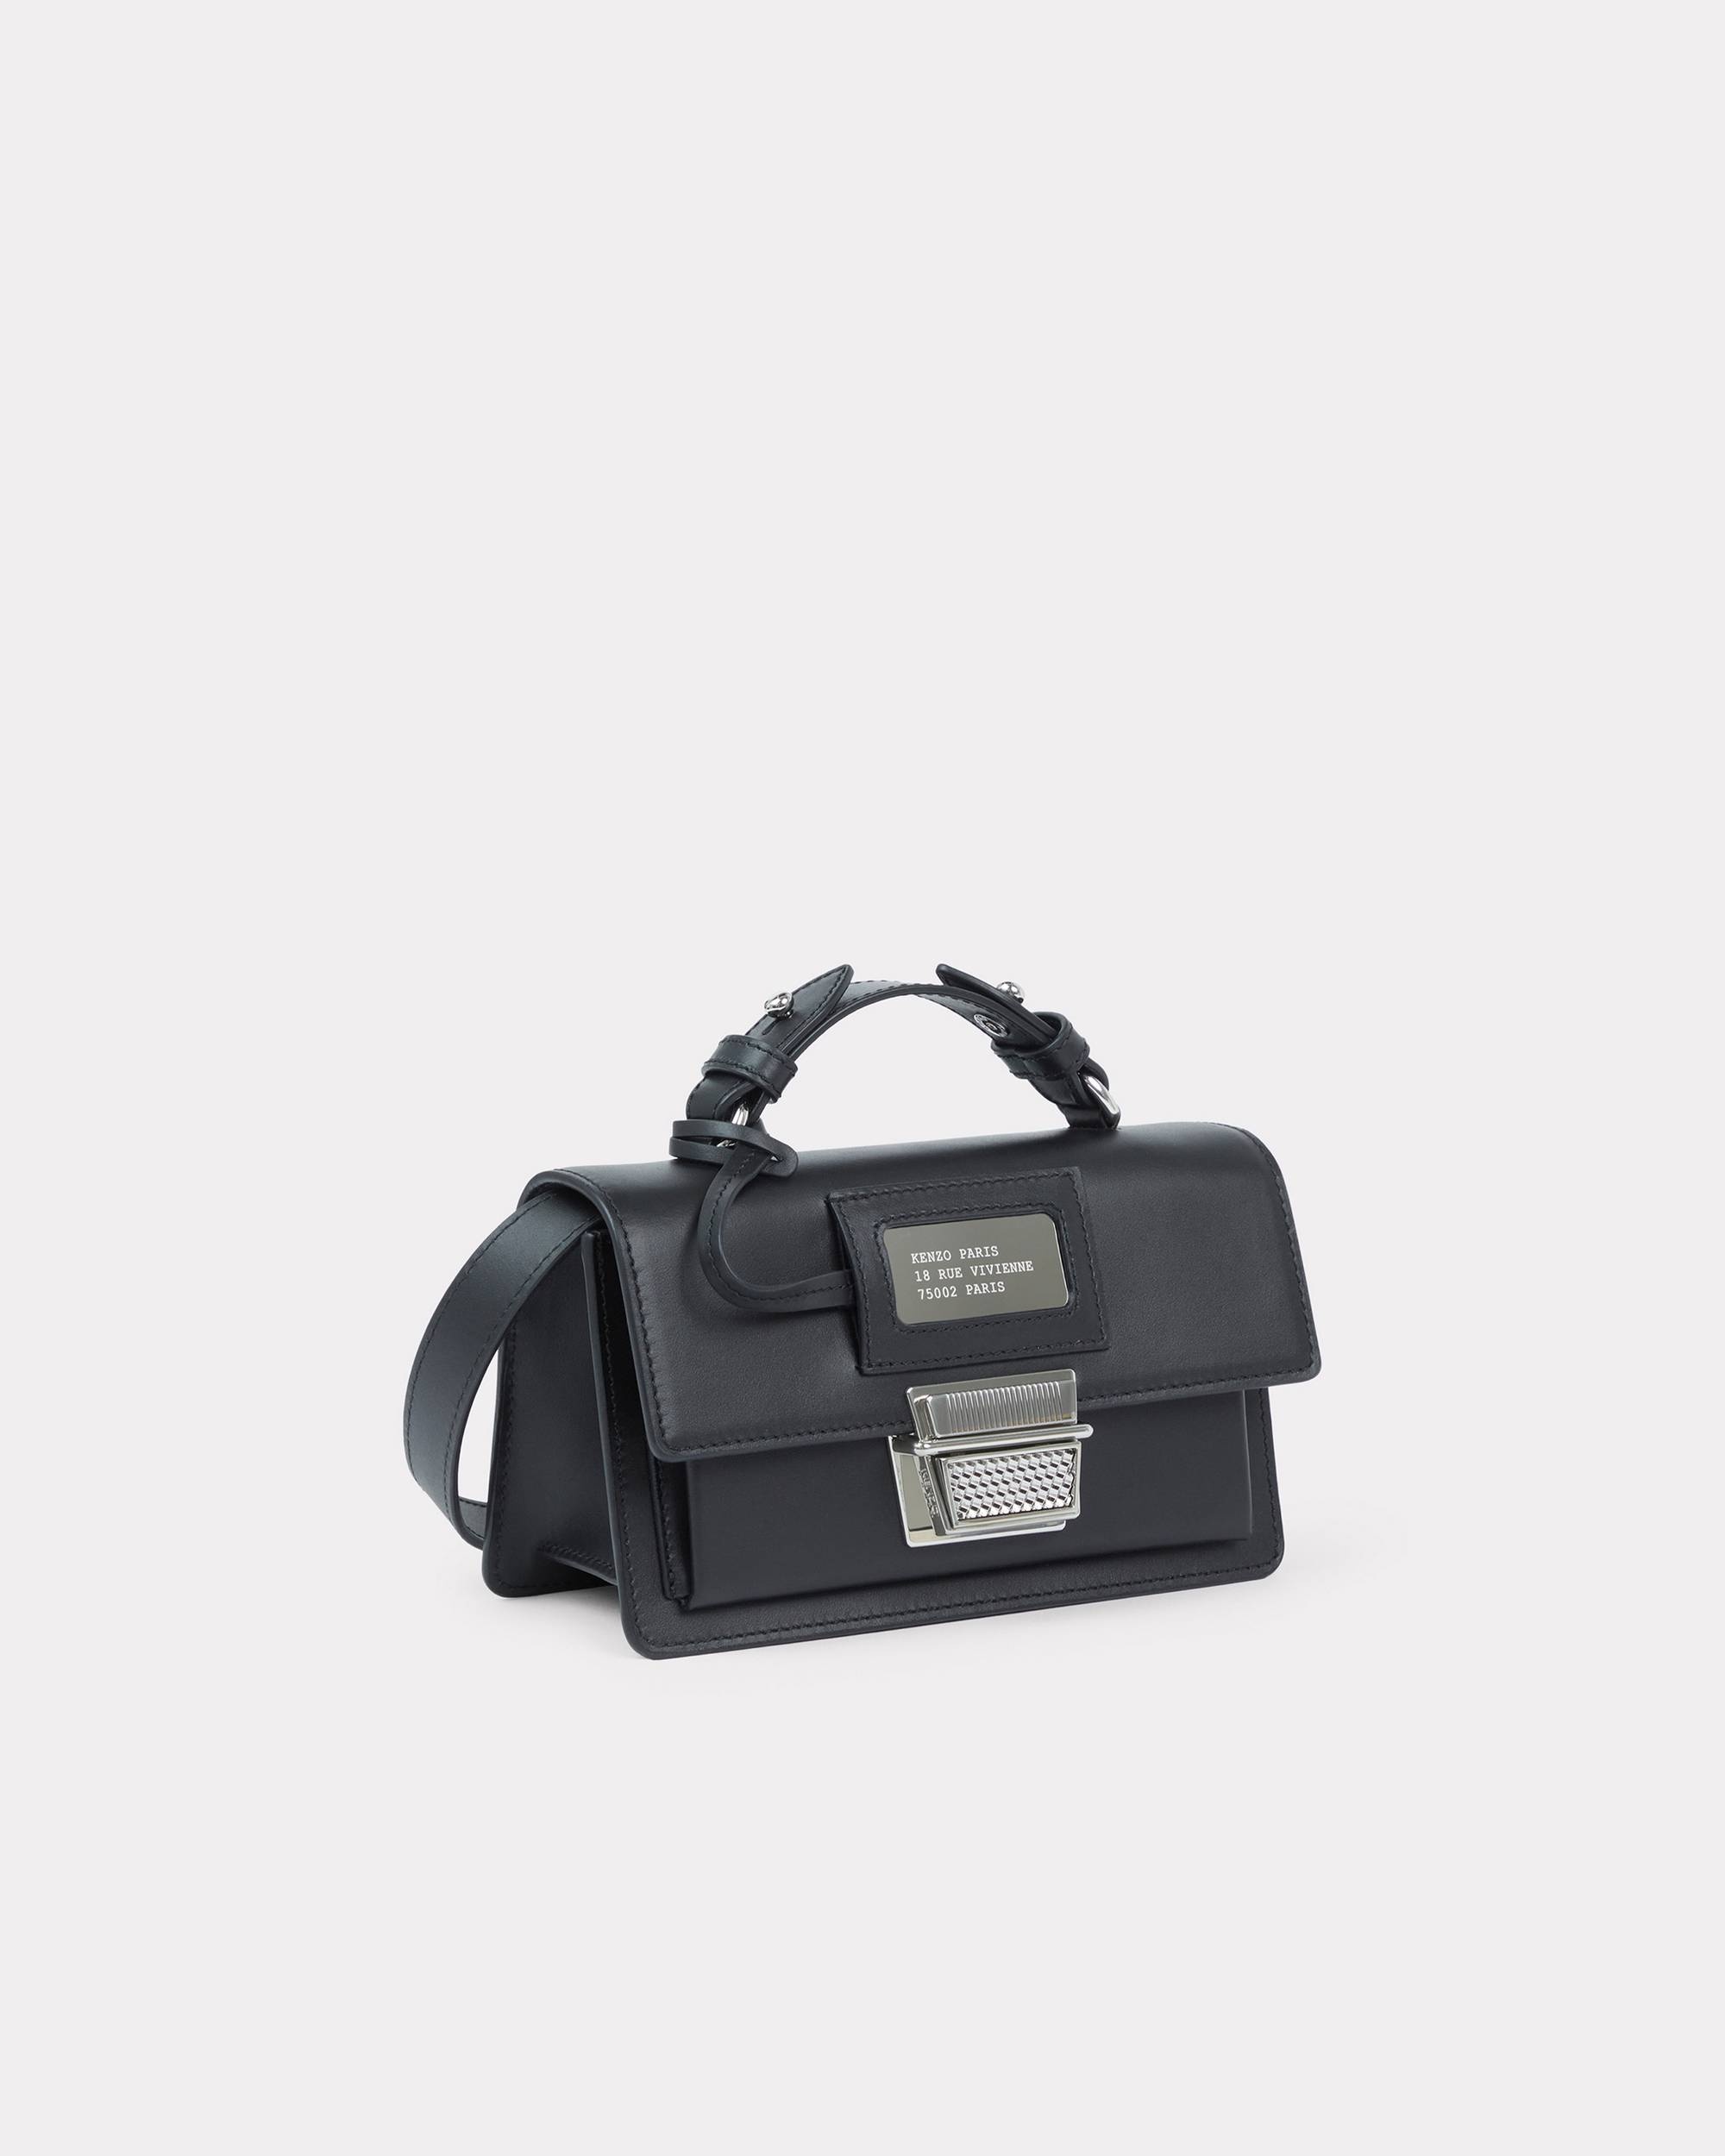 'Rue Vivienne' miniature leather bag with strap - 5